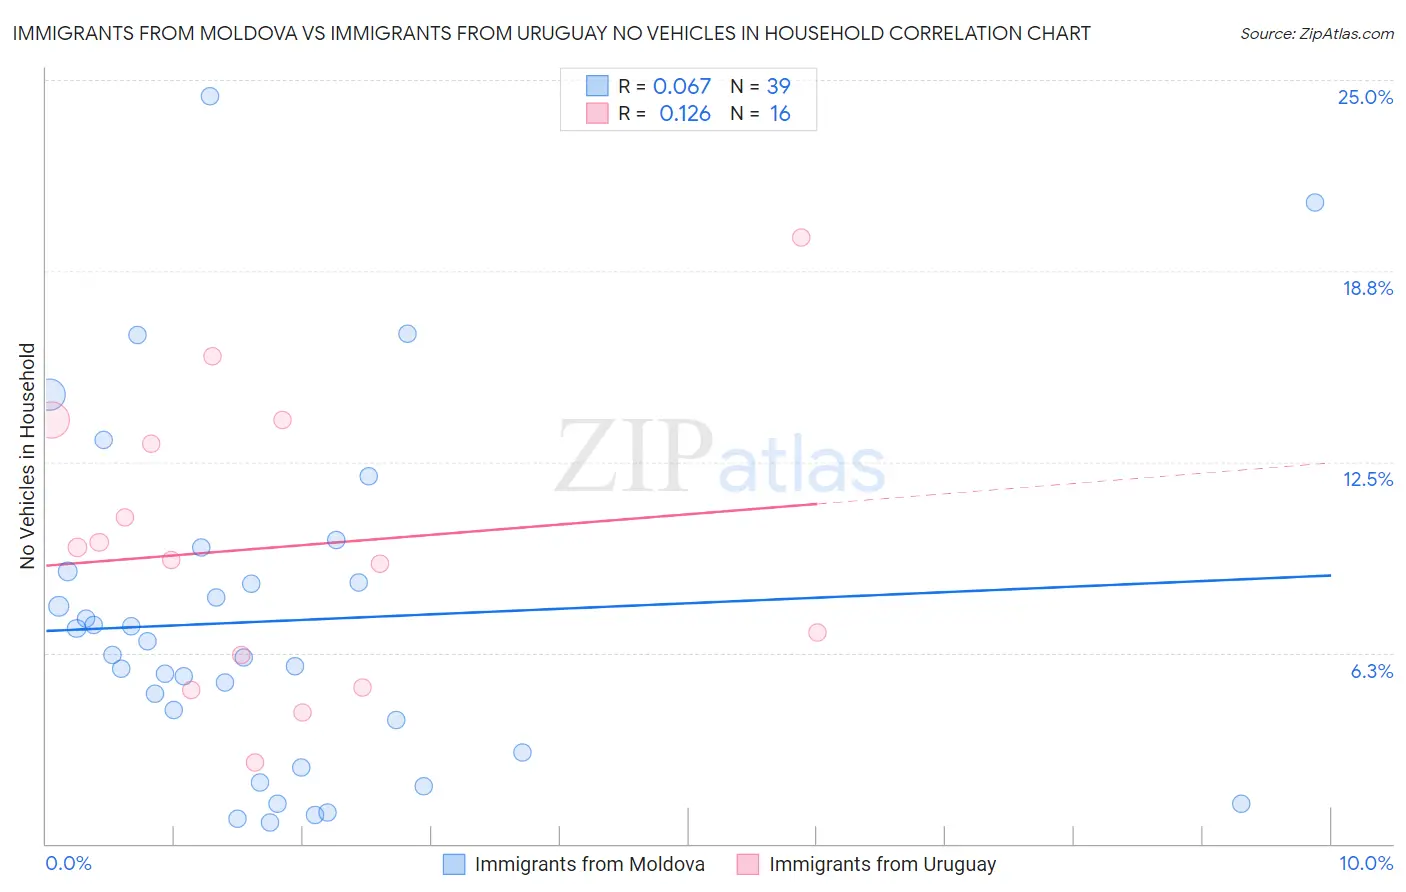 Immigrants from Moldova vs Immigrants from Uruguay No Vehicles in Household